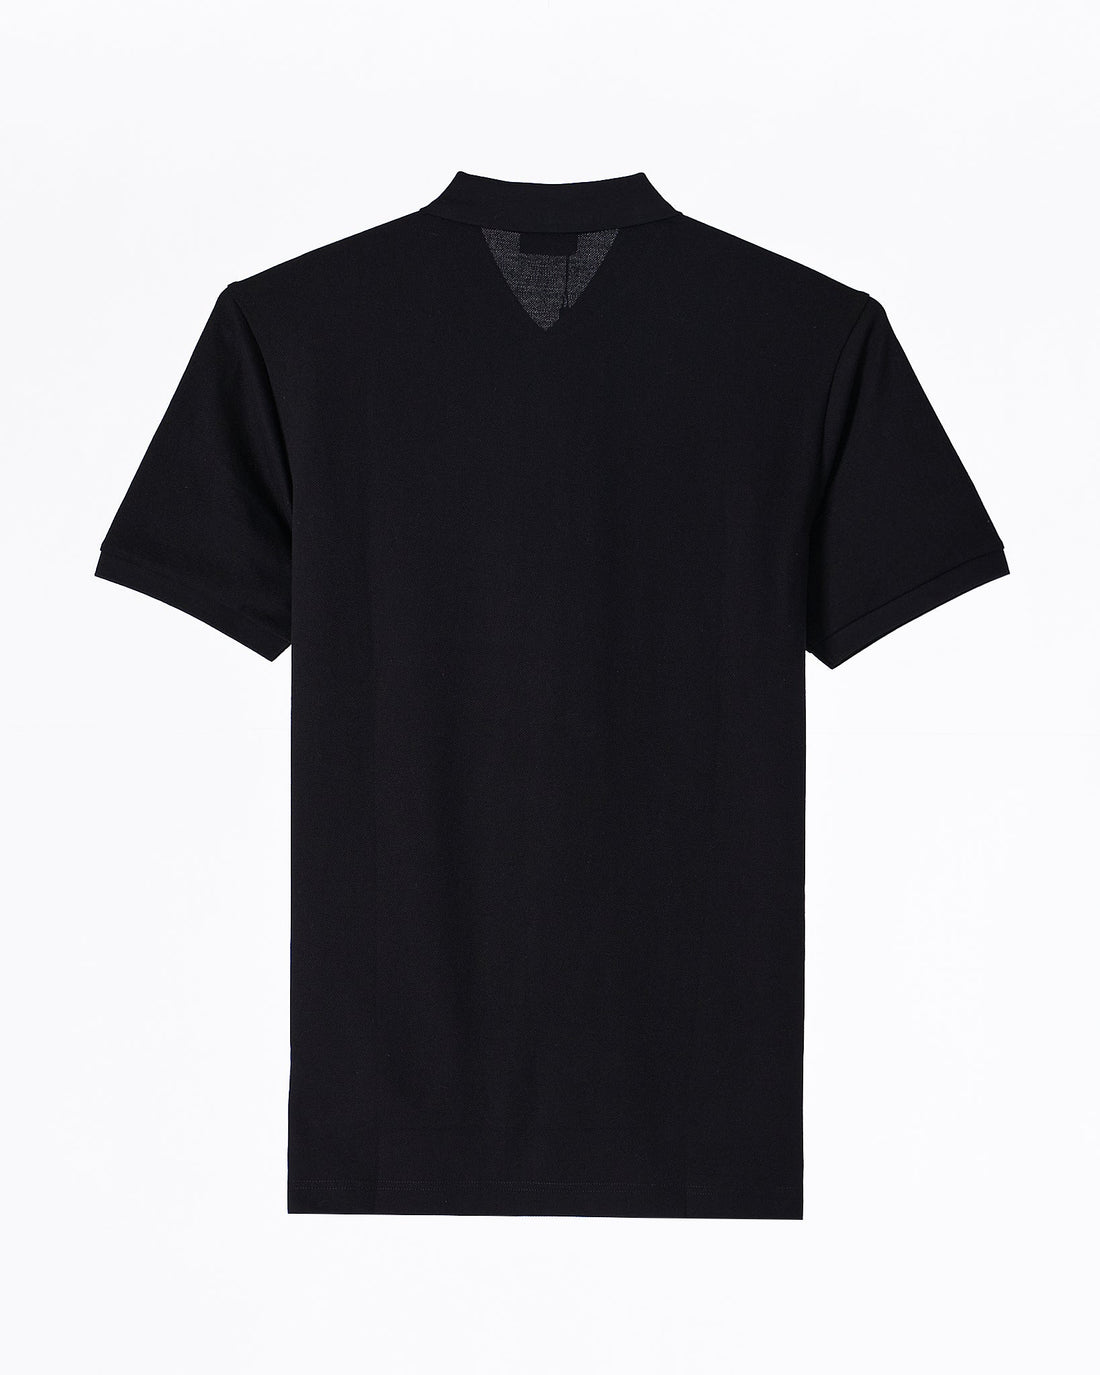 MOI OUTFIT-CD Embroidered Men Black Polo Shirt 67.90